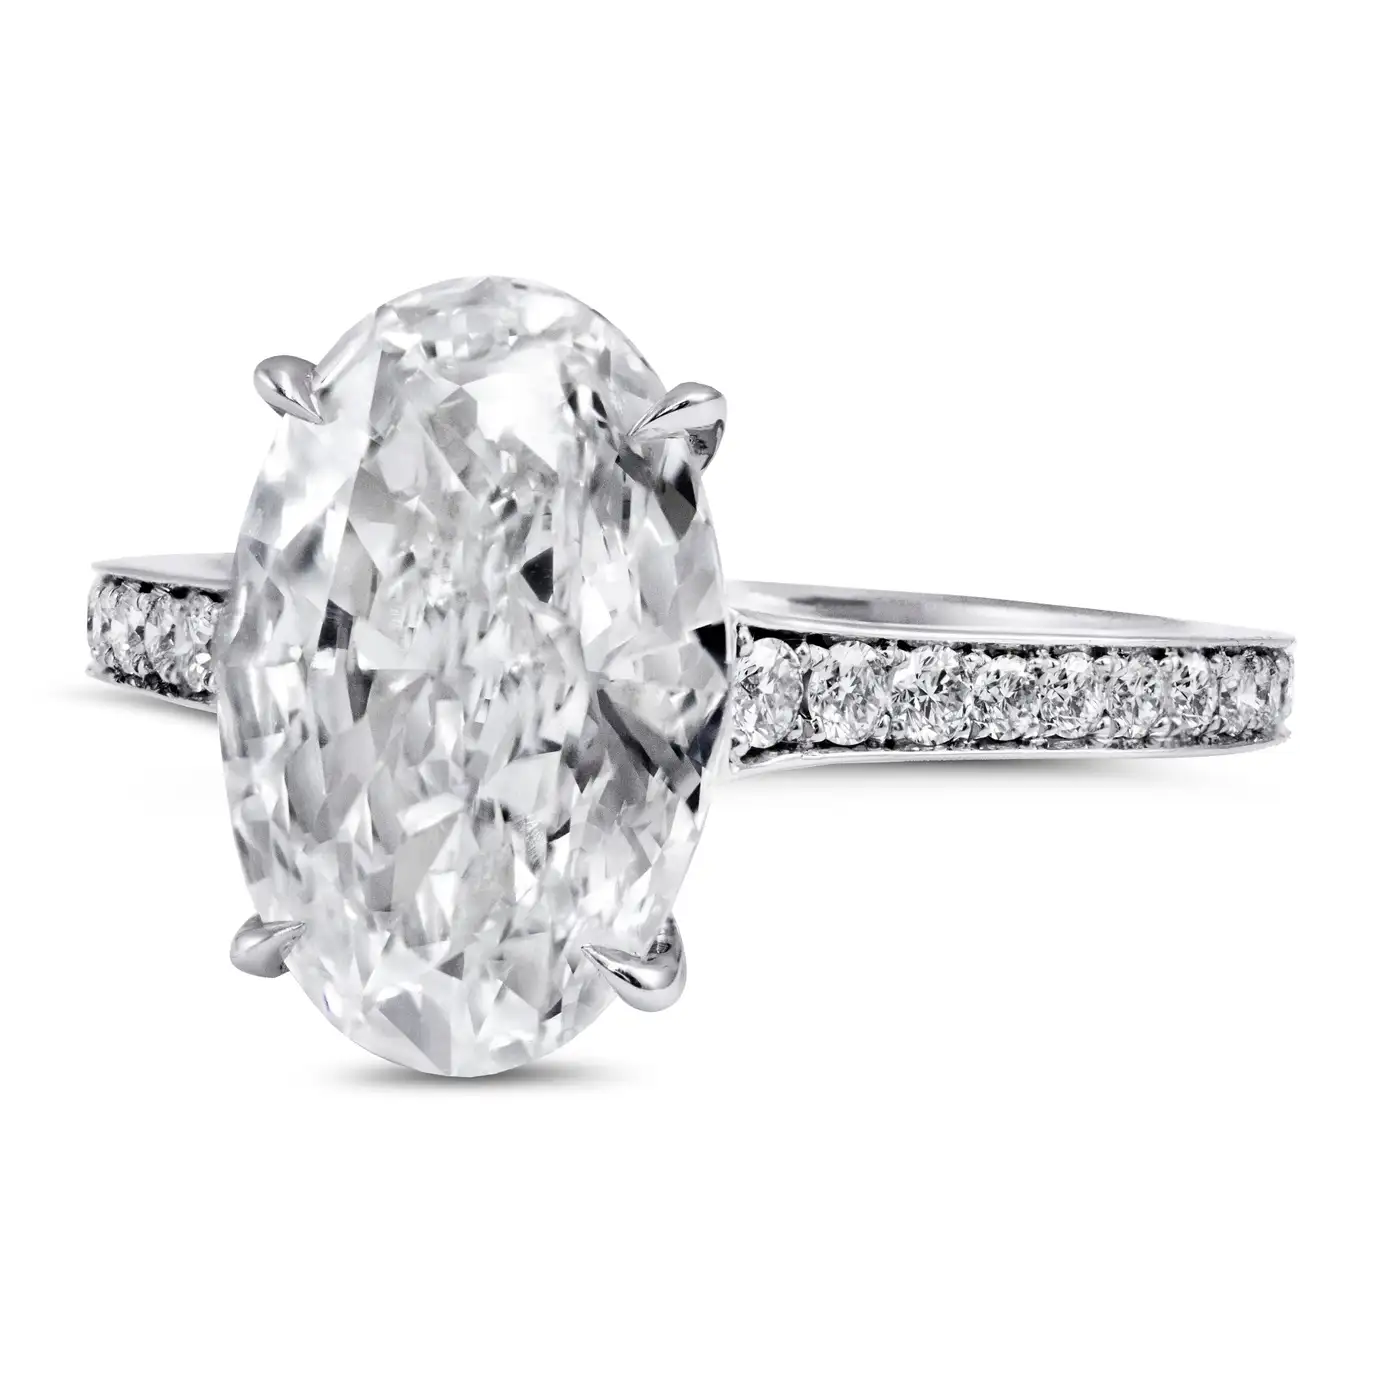 3.0-Carats-Oval-Cut-Diamond-Engagement-Ring-with-side-stones-GIA-Certified-4.webp